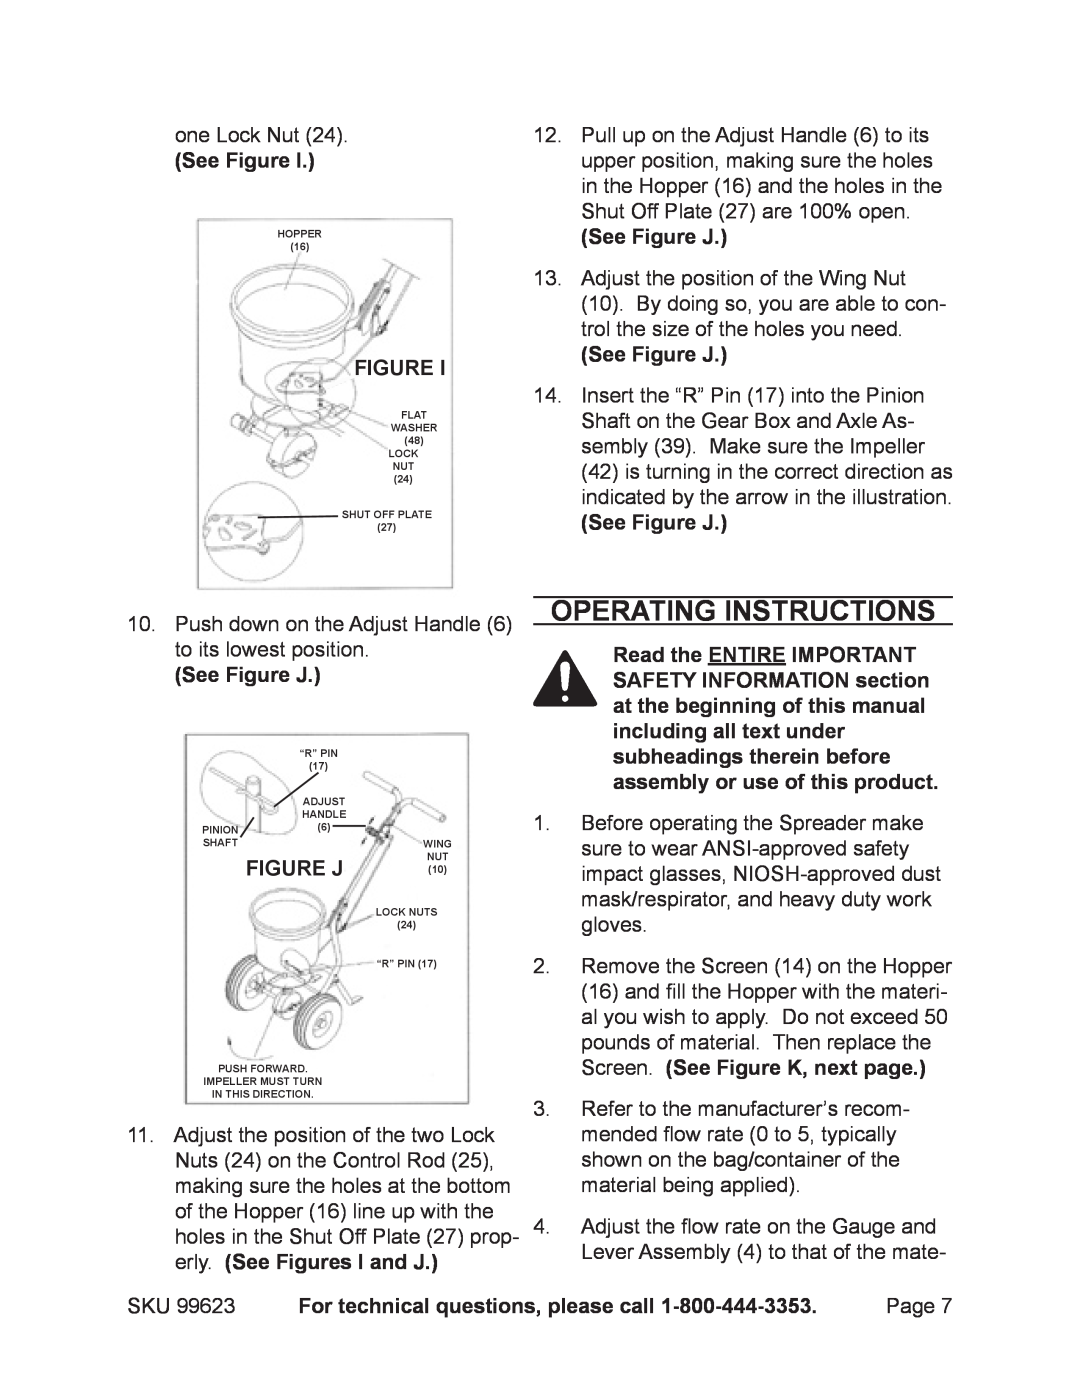 Harbor Freight Tools 99623 manual Operating Instructions, See Figure J, For technical questions, please call 